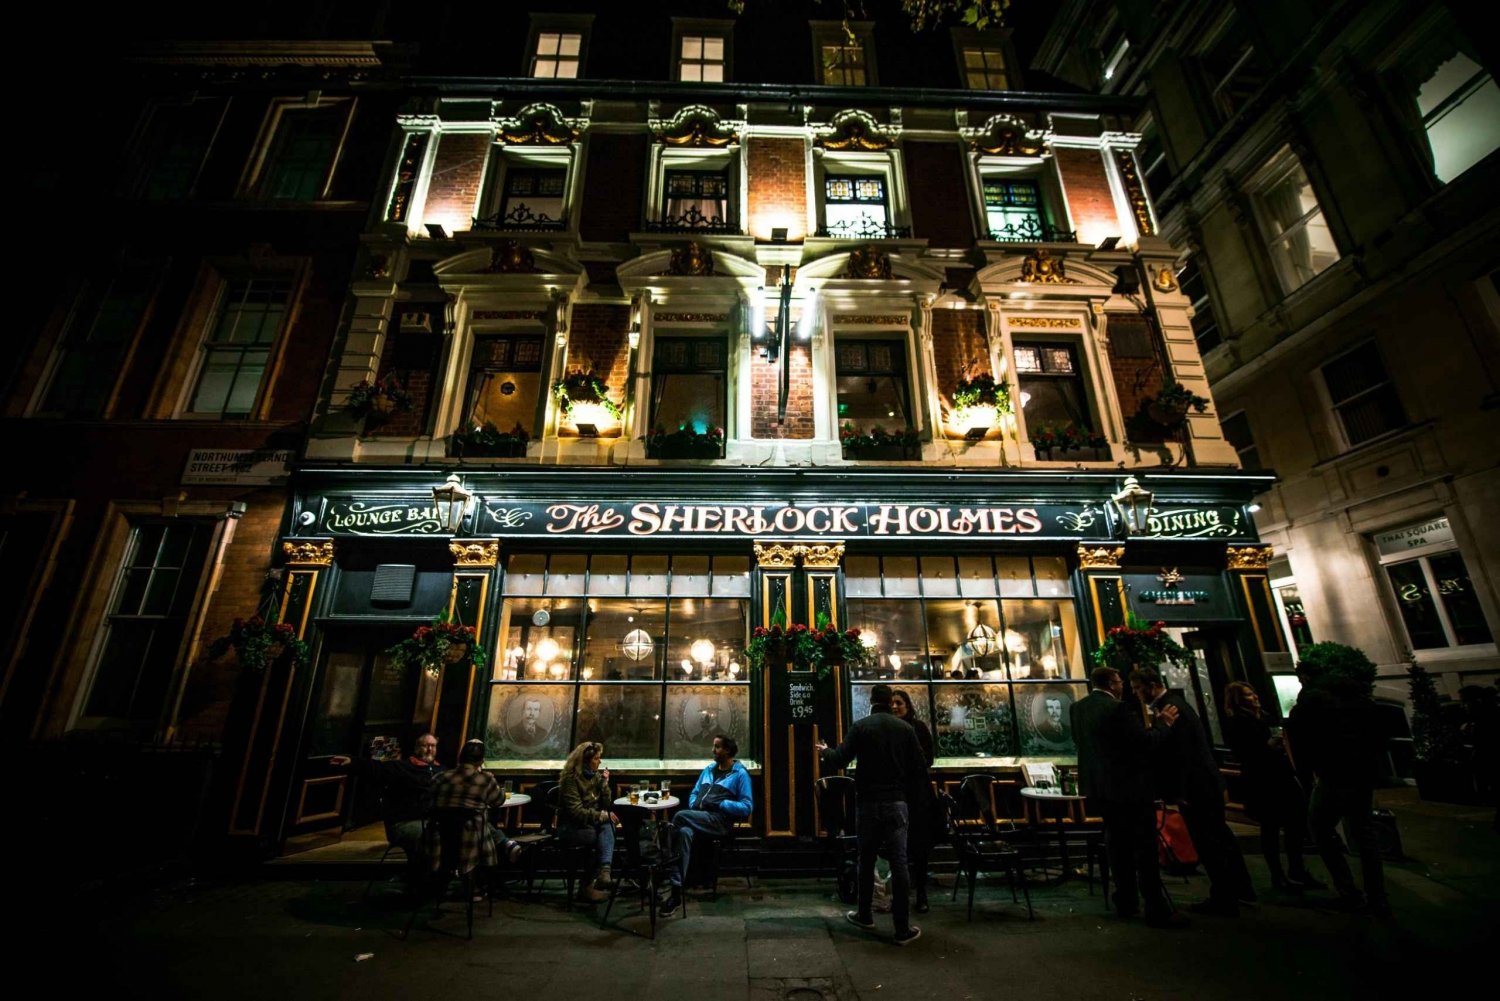 London: Jack The Ripper-omvisning med gratis fish and chips